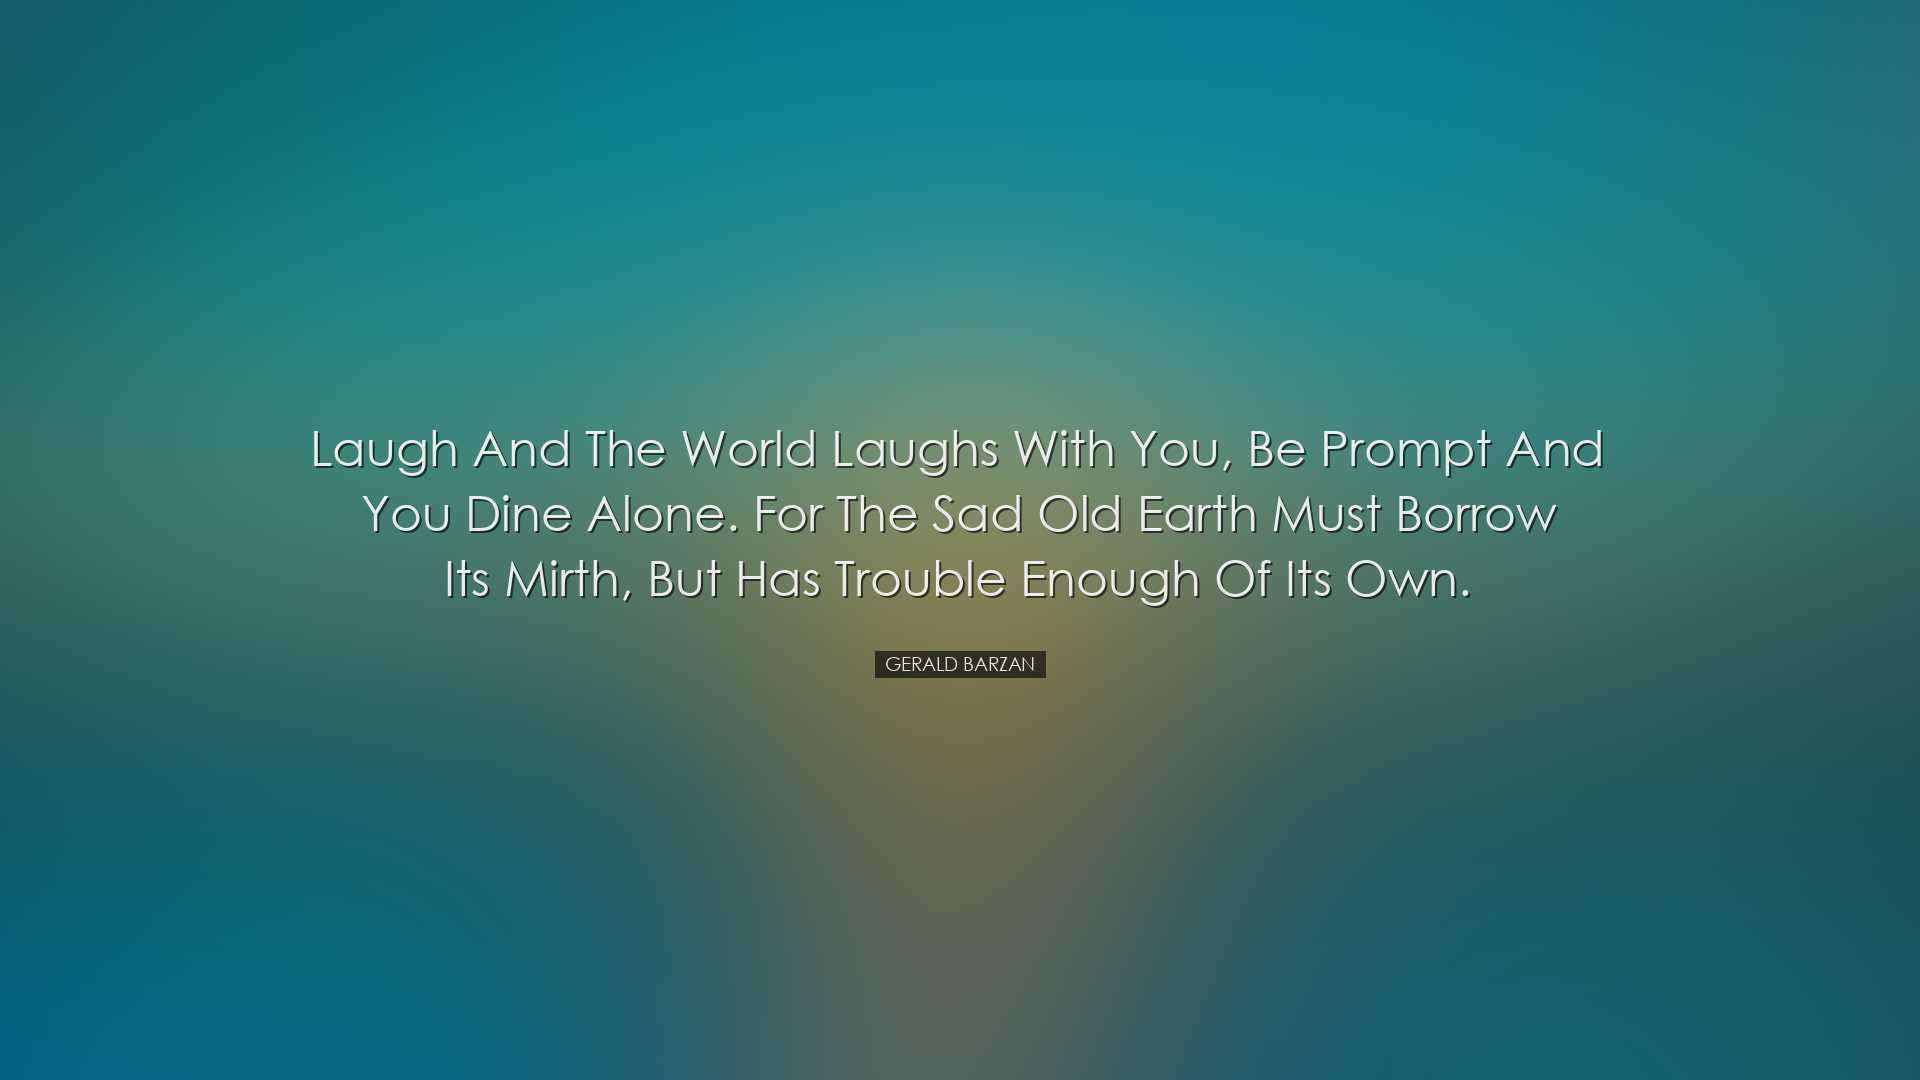 Laugh and the world laughs with you, be prompt and you dine alone.